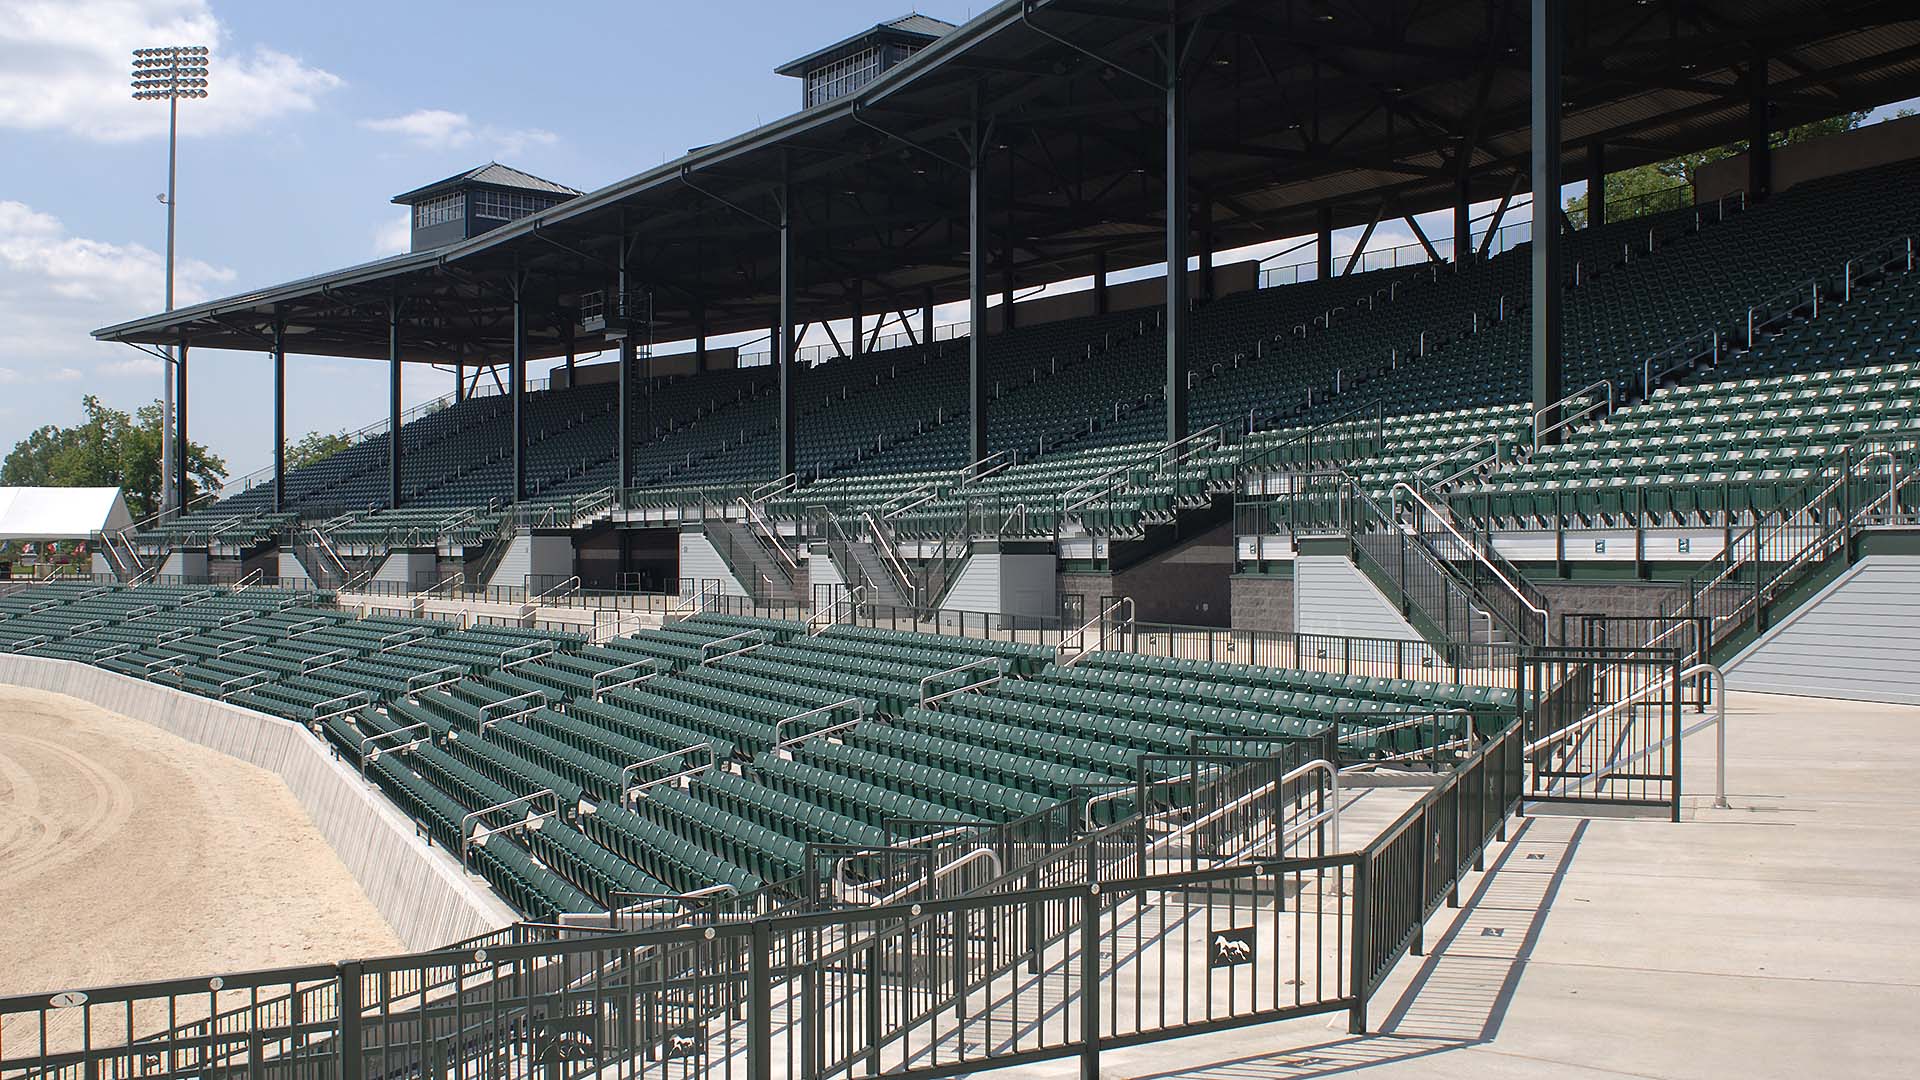 A view of the grandstand seating at Lexington Horse park, finished with an aluminum rail system.